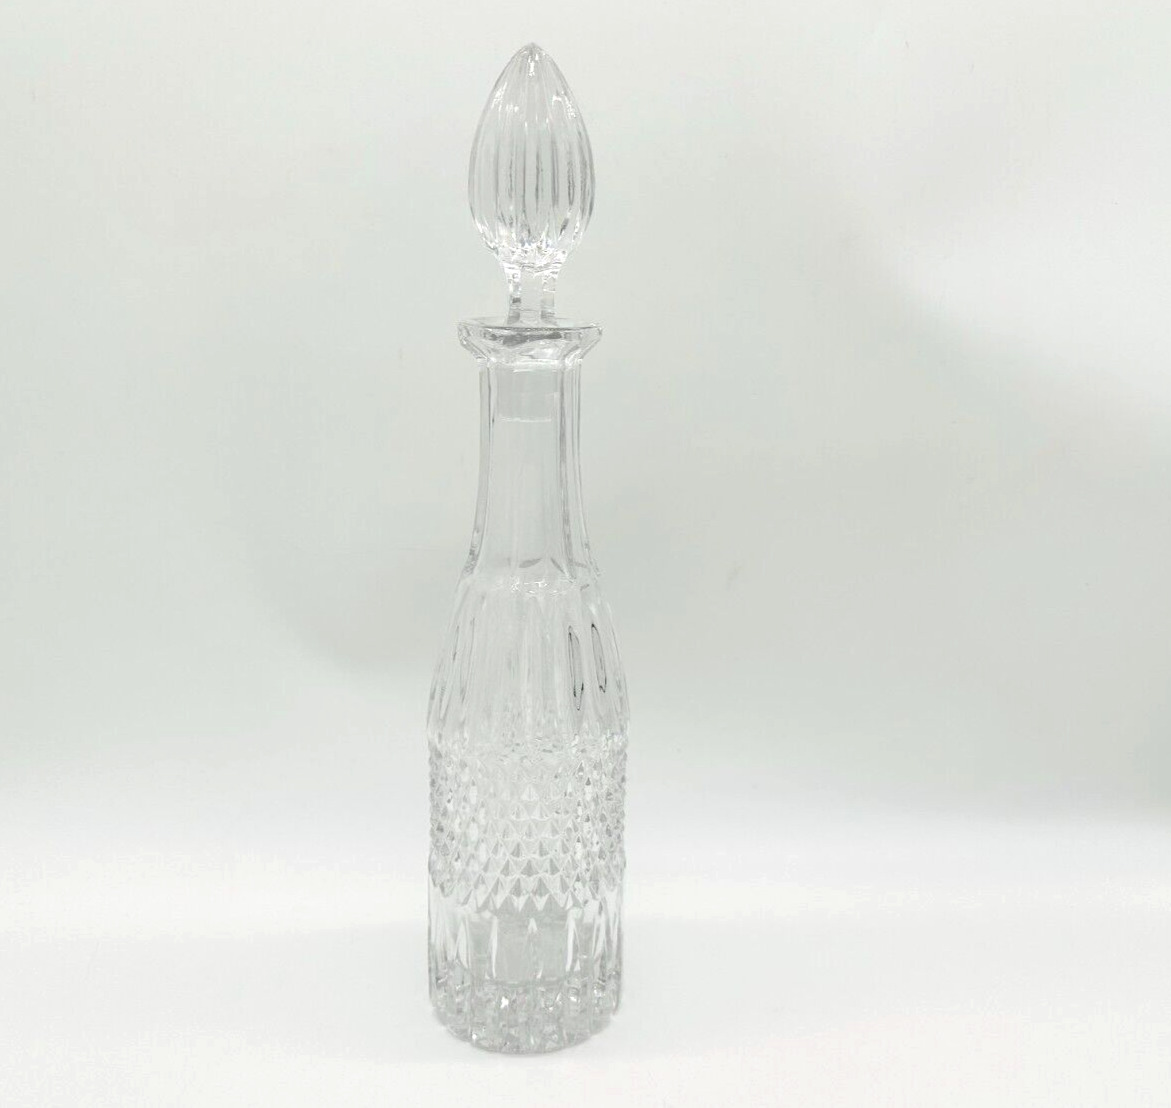 15 Inch Diamond Crystal Glass Decanter & Stopper